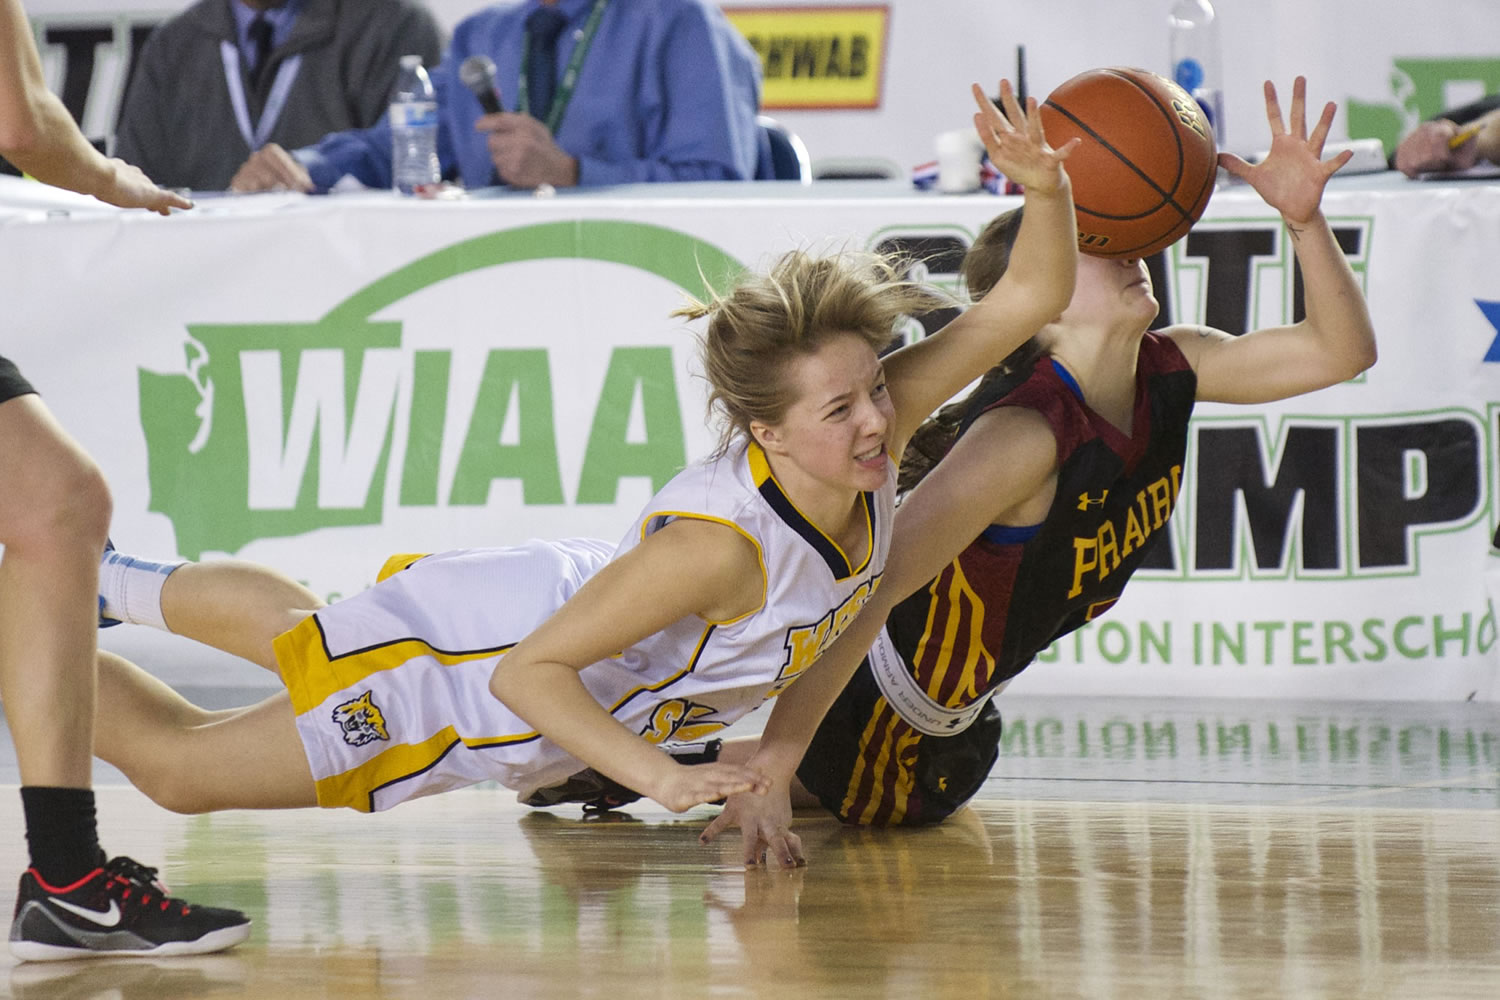 Jozie Tangeman , right, fights for a loose ball with West Seattle's IzzyTurk as Prairie loses to West Seattle 54-45 at the 2015 WIAA Hardwood Classic 3A Girls tournament at the Tacoma Dome, Friday, March 6, 2015.